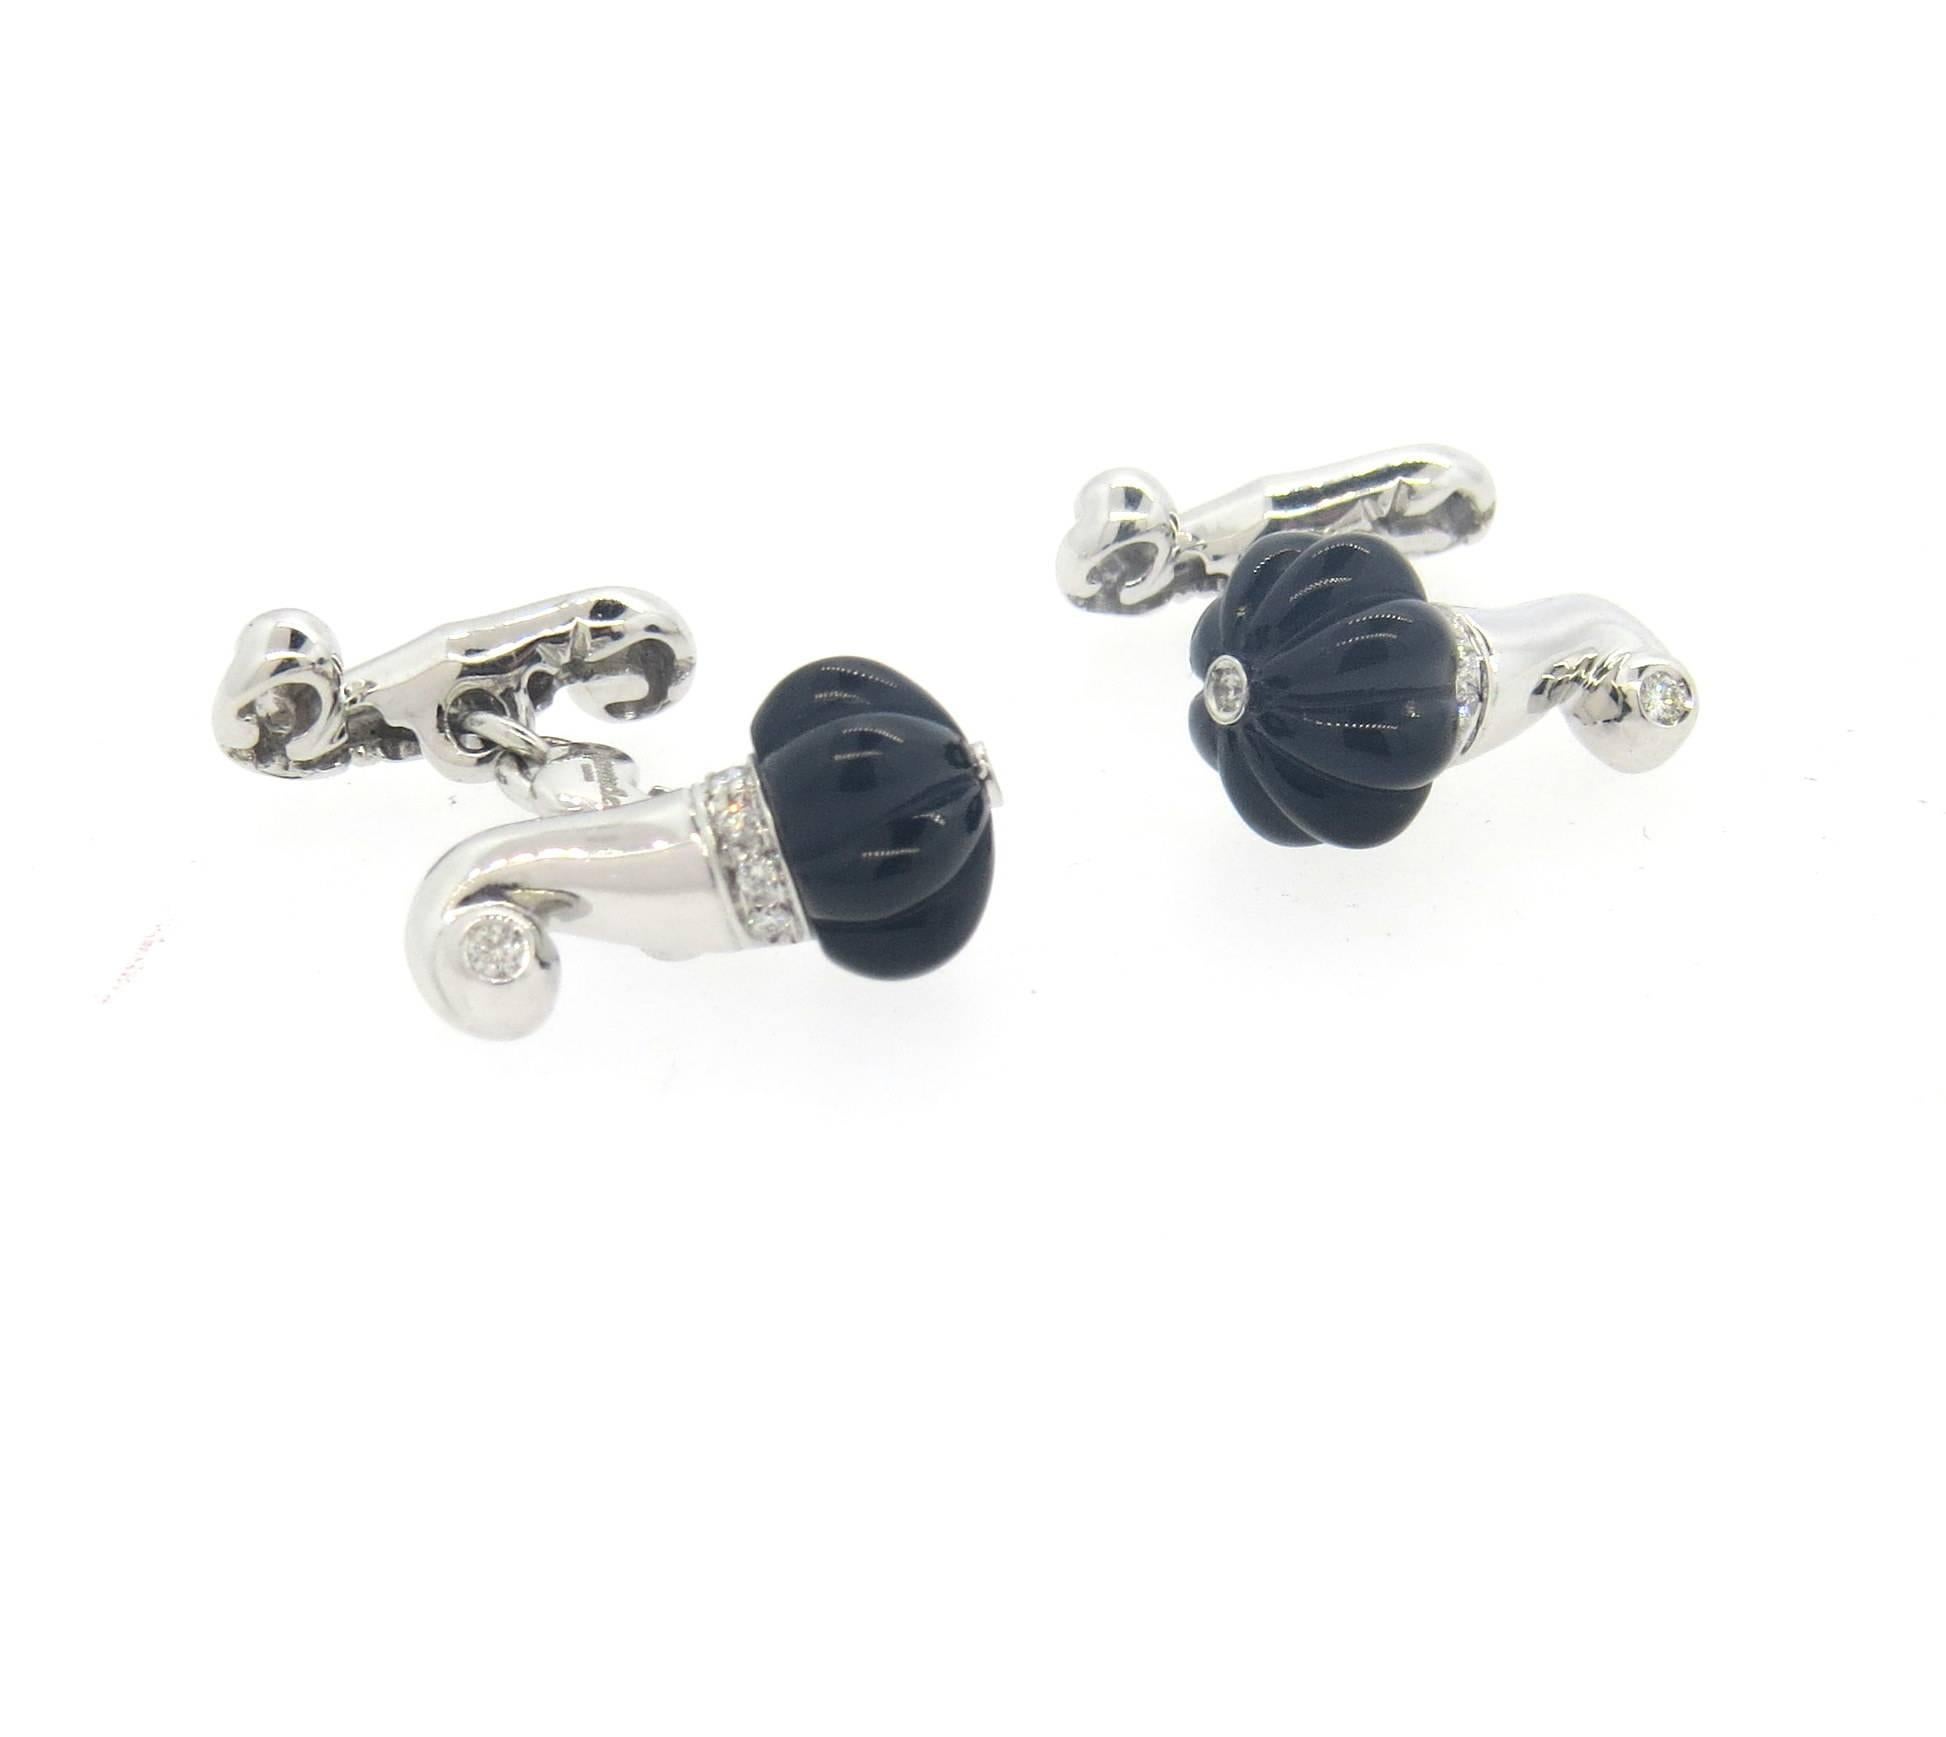 A pair of 18k white gold cufflinks, crafted by Chantecler, featuring carved onyx top, surrounded with 0.15ctw in diamonds. Each top measures 18mm x 8mm, back - 15mm x 5mm. Marked: Chantecler capri, Italy, 18kt, 750. Weight - 10 grams
Come with